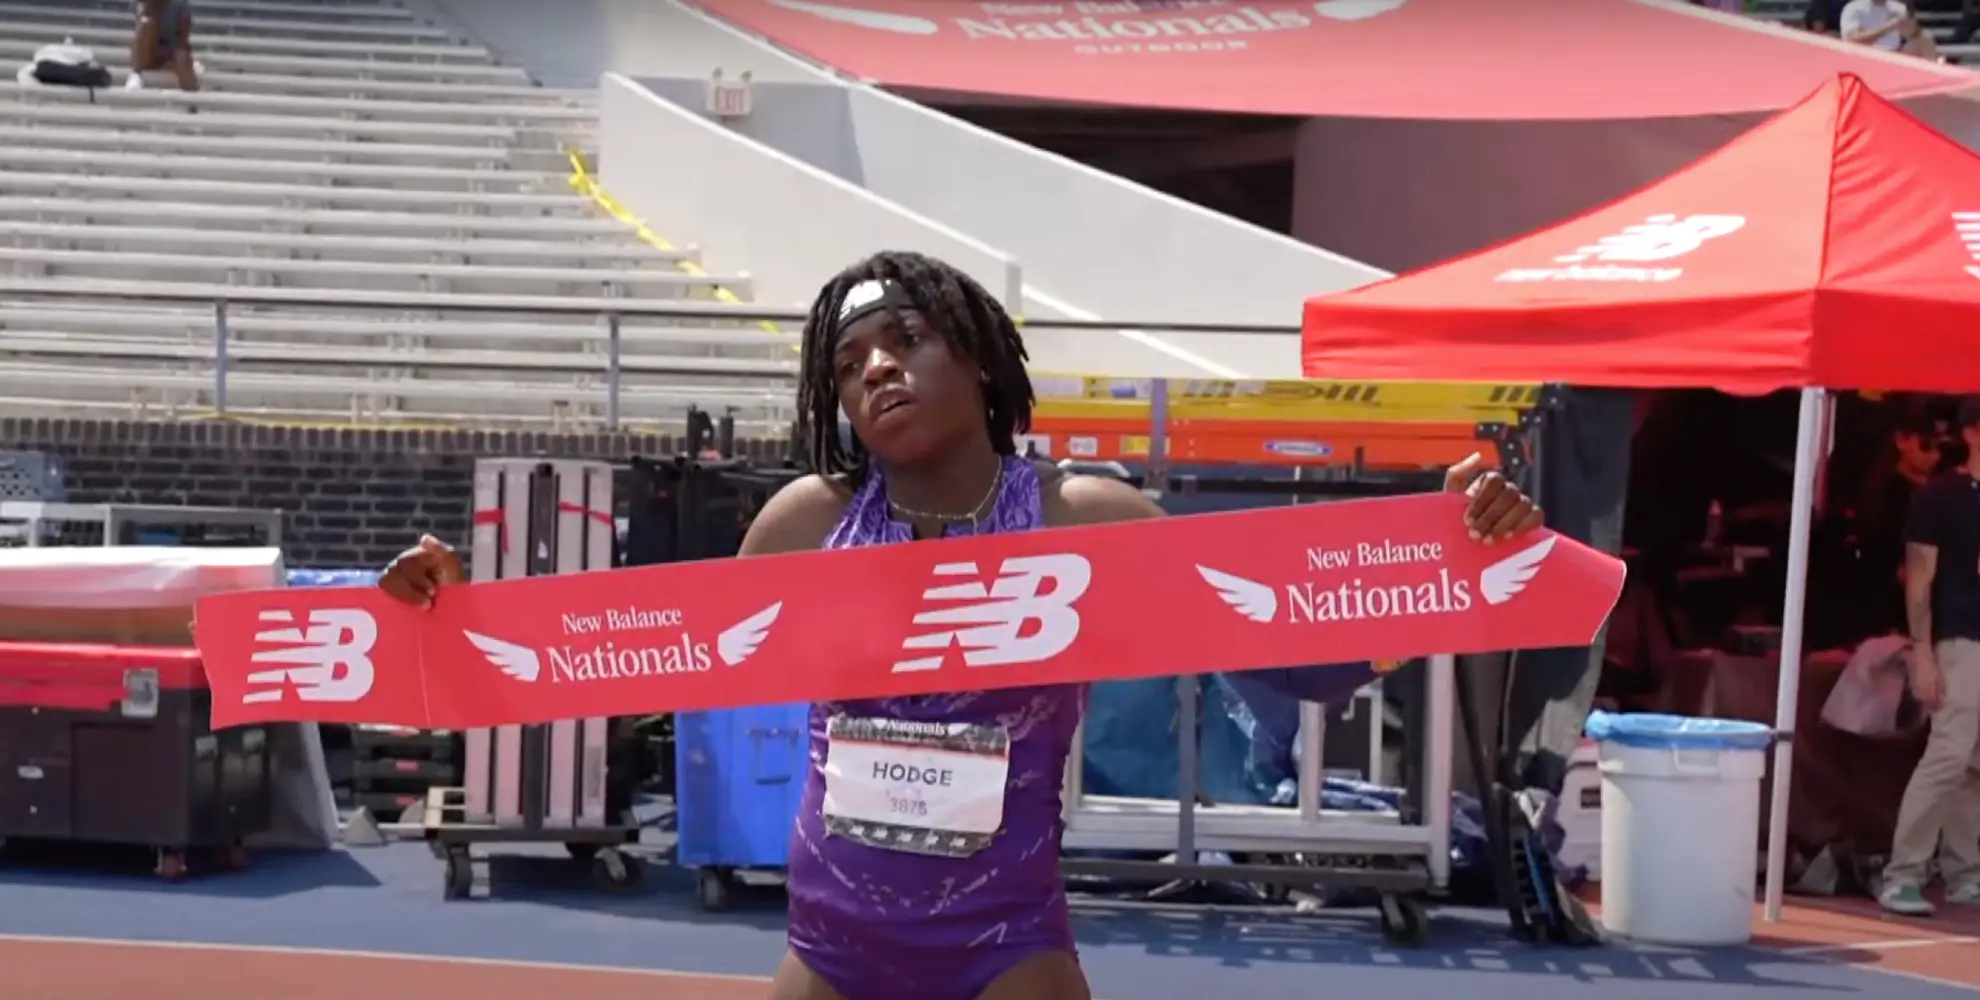 Adaejah Hodge wins New Balance Nationals Outdoor 200m title; Shawnti Jackson DQ